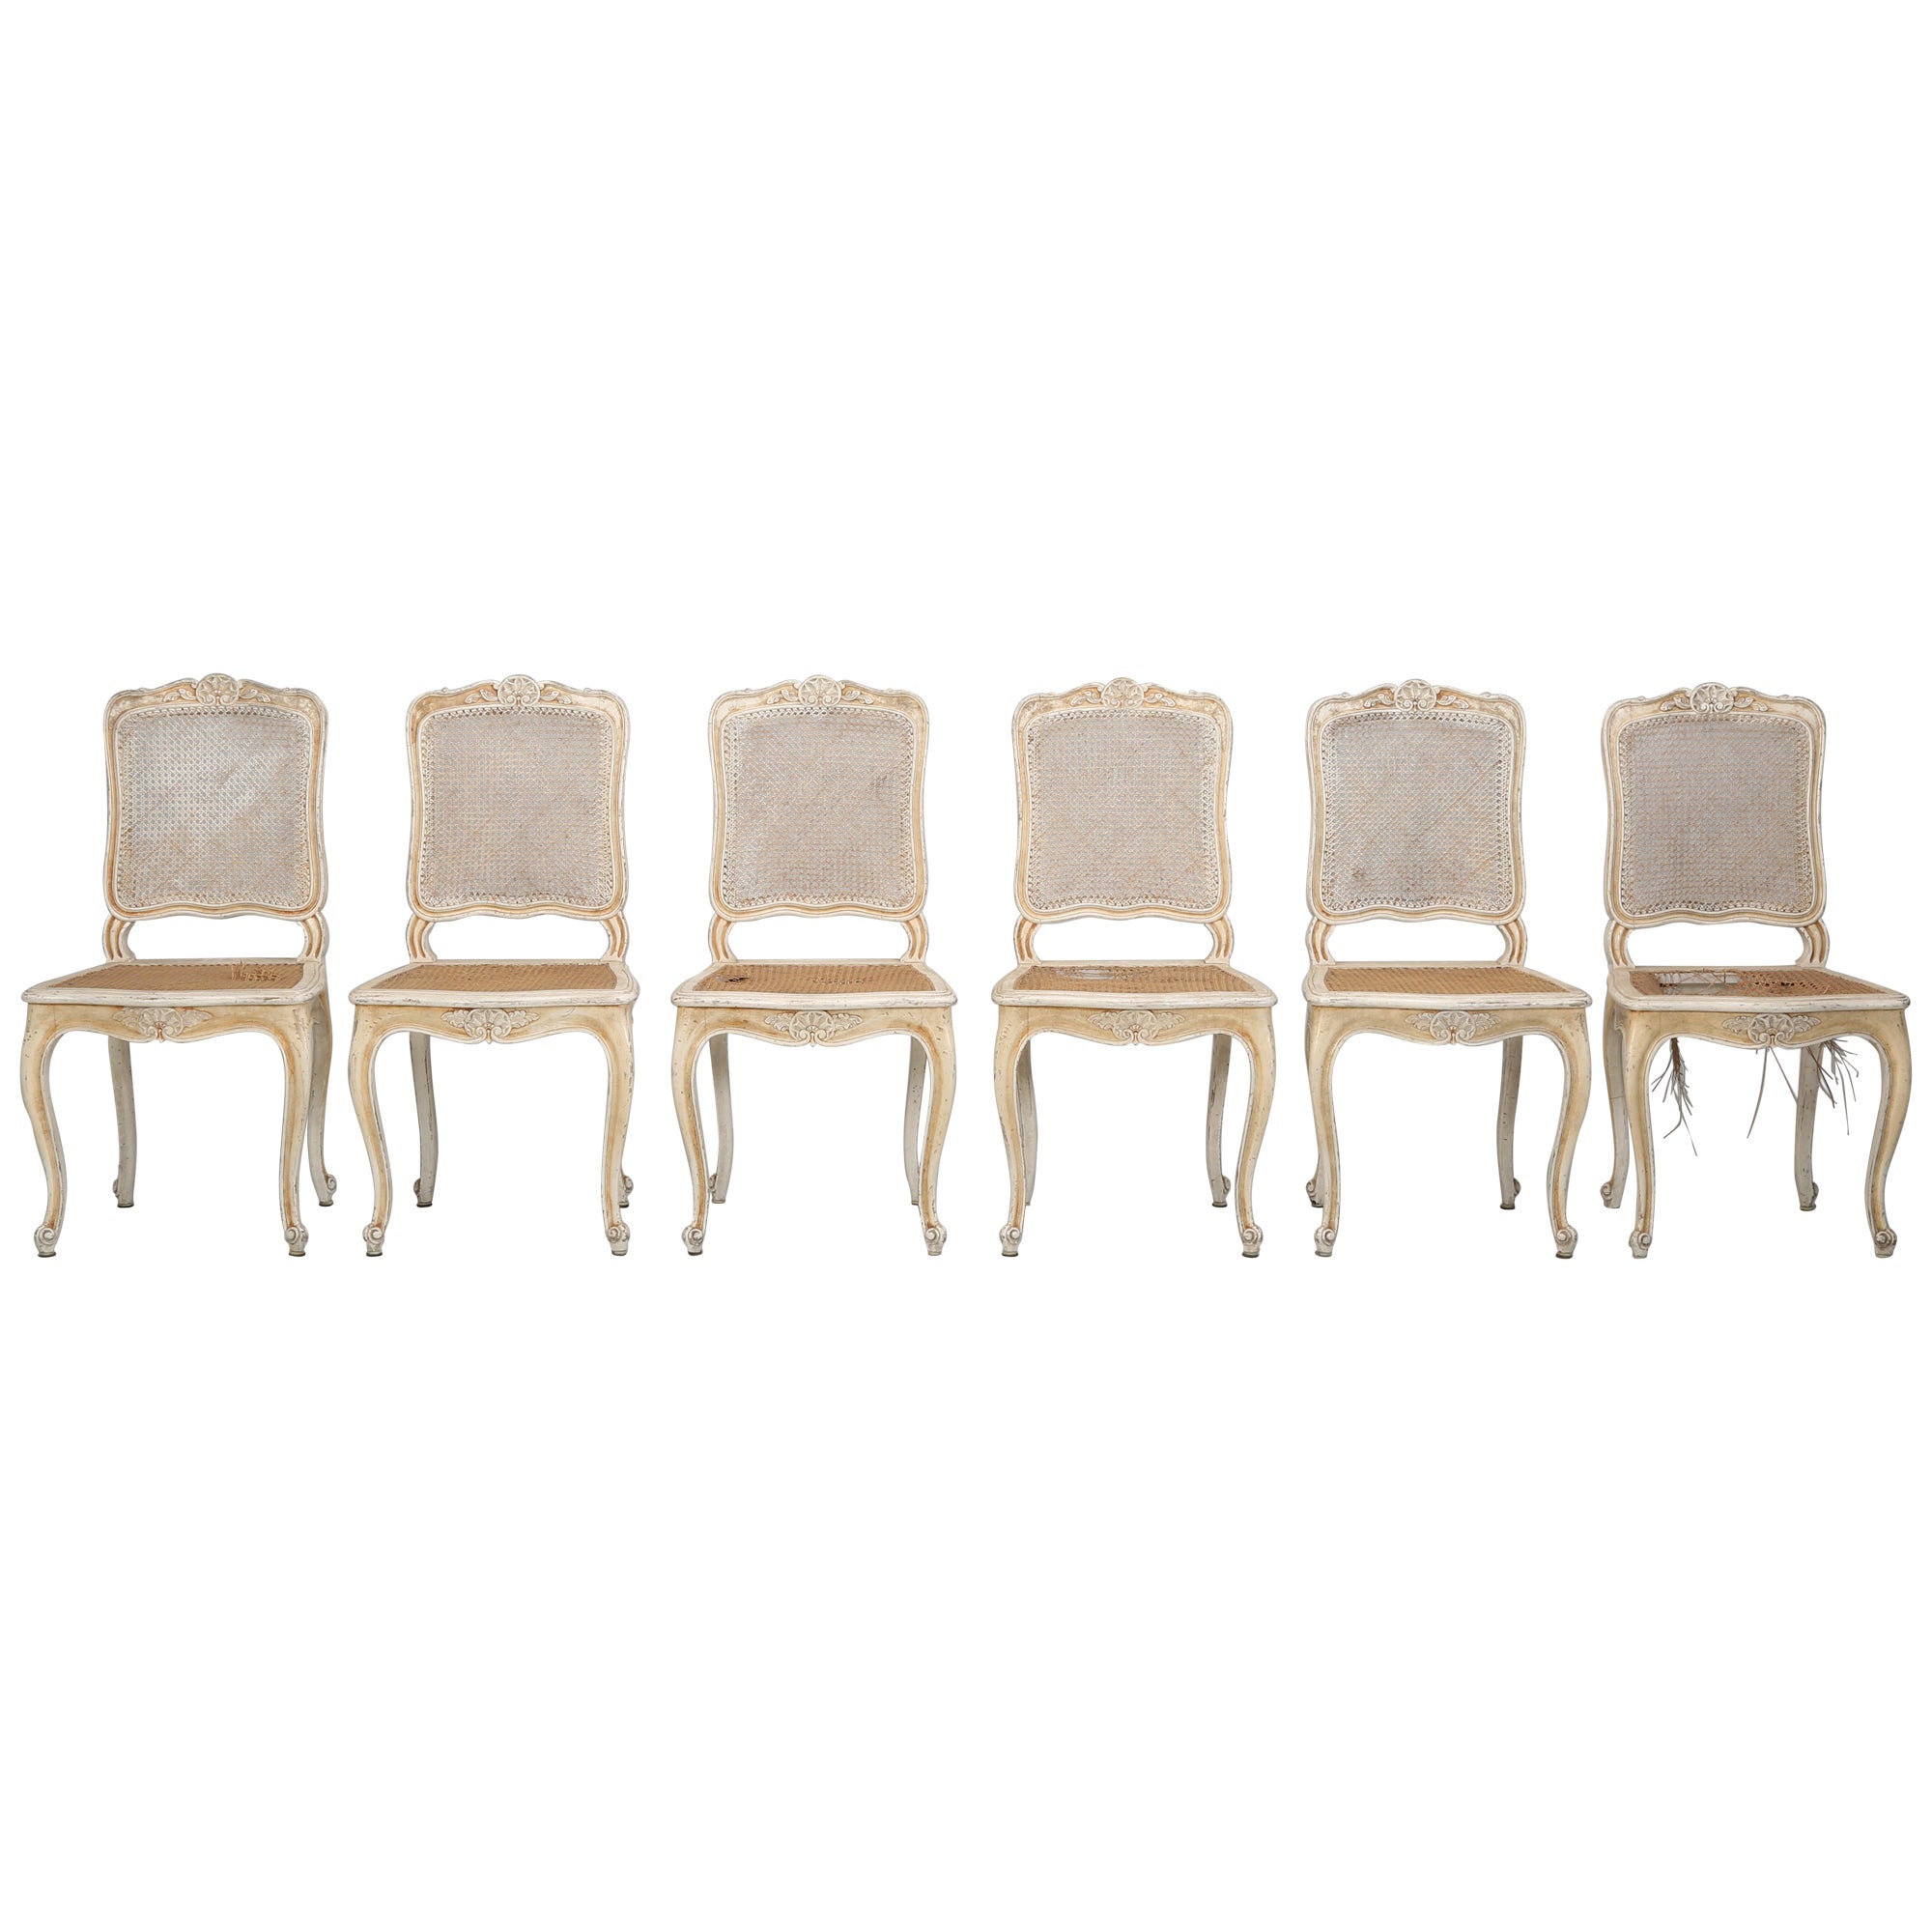 Antique Swedish Set of (6) Old Painted Dining Chairs Require Restoration